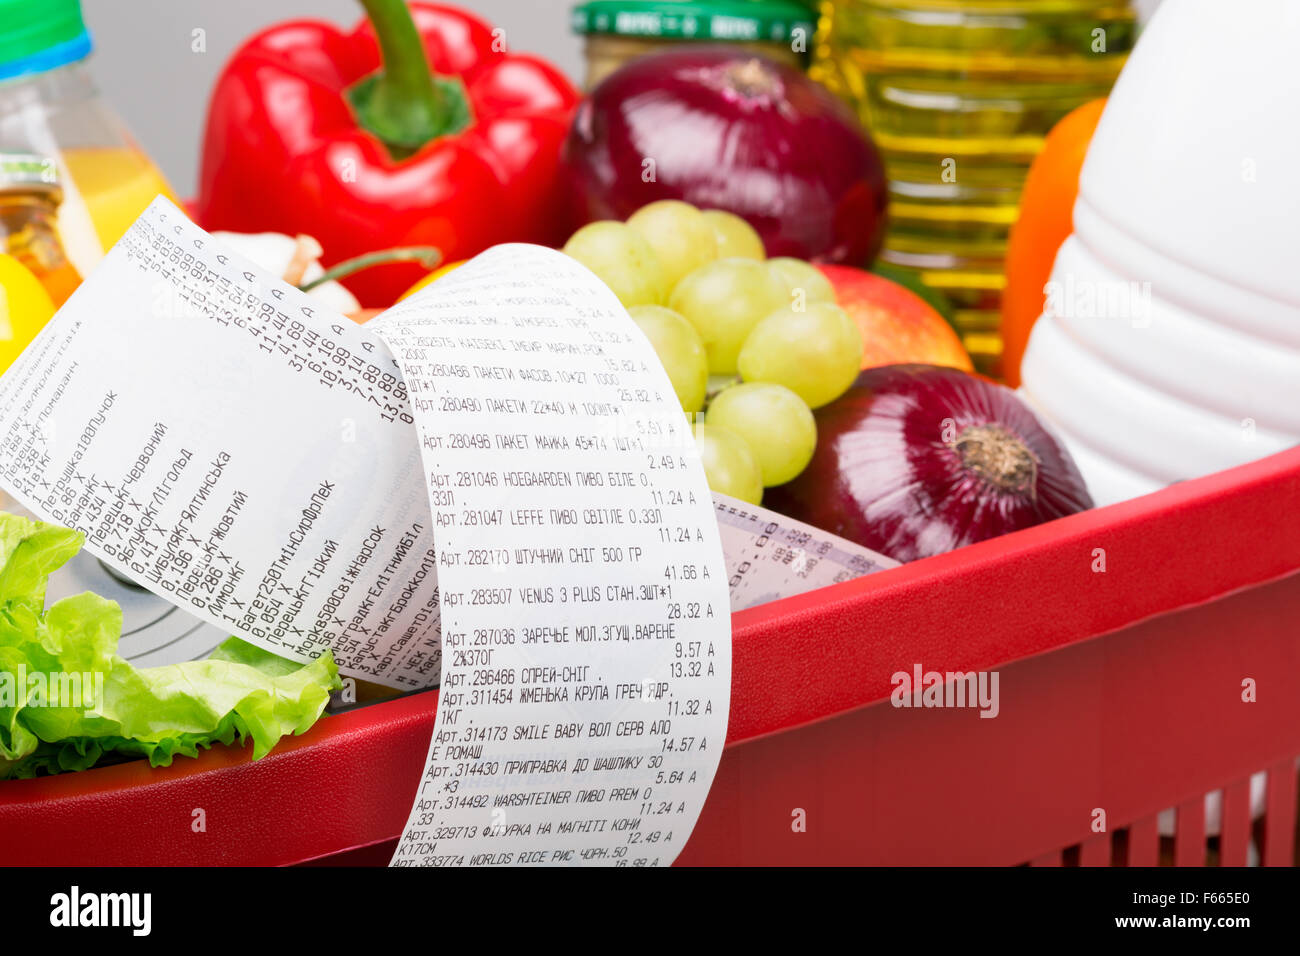 Red basket full of goods. Very long cashier's check. Stock Photo